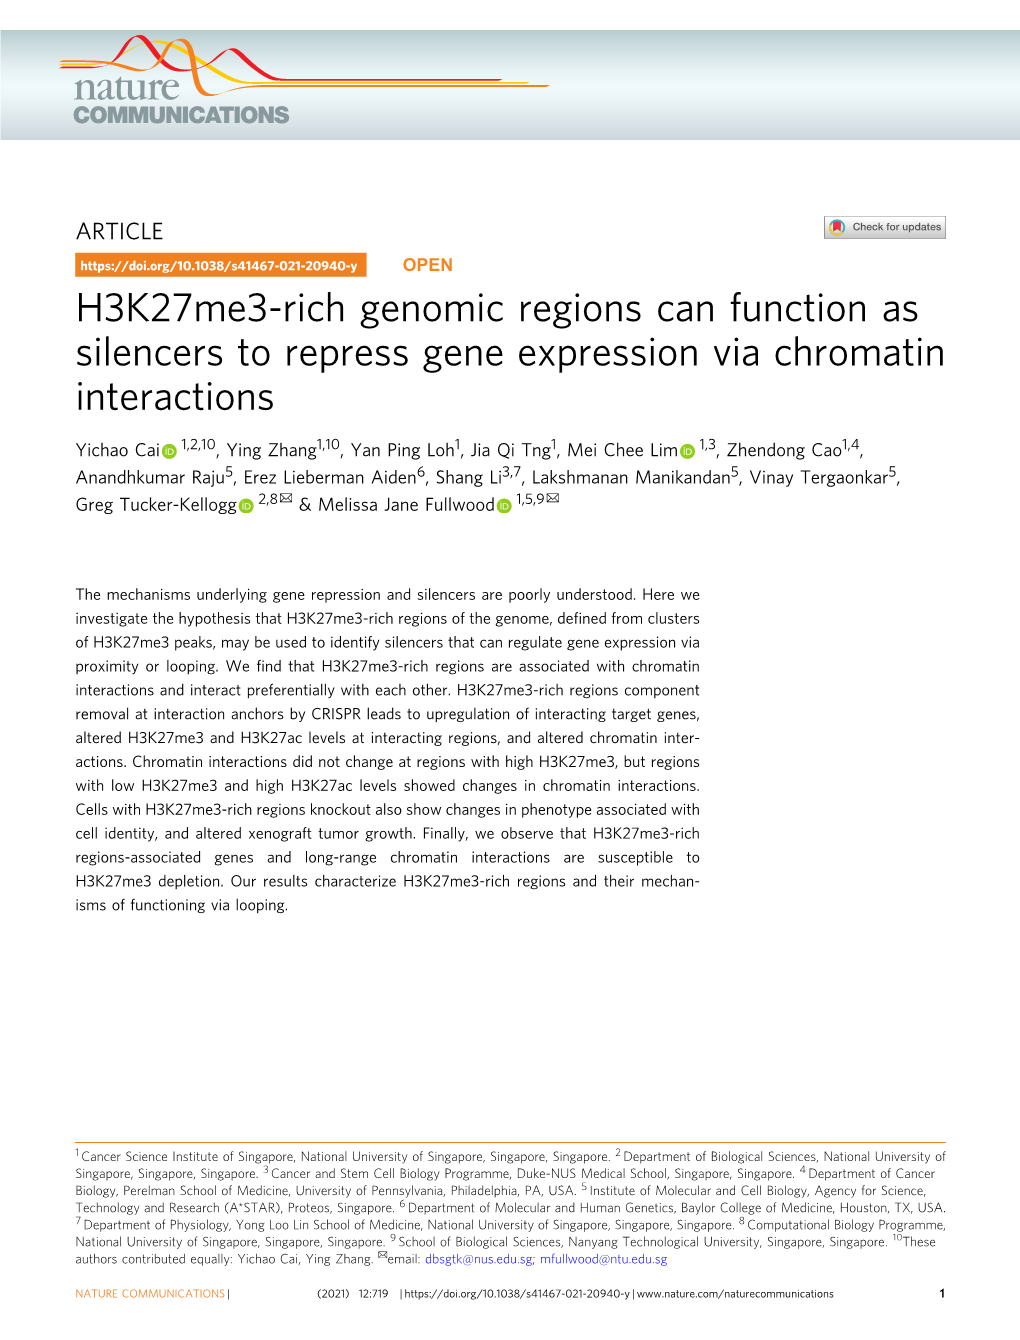 H3k27me3-Rich Genomic Regions Can Function As Silencers to Repress Gene Expression Via Chromatin Interactions